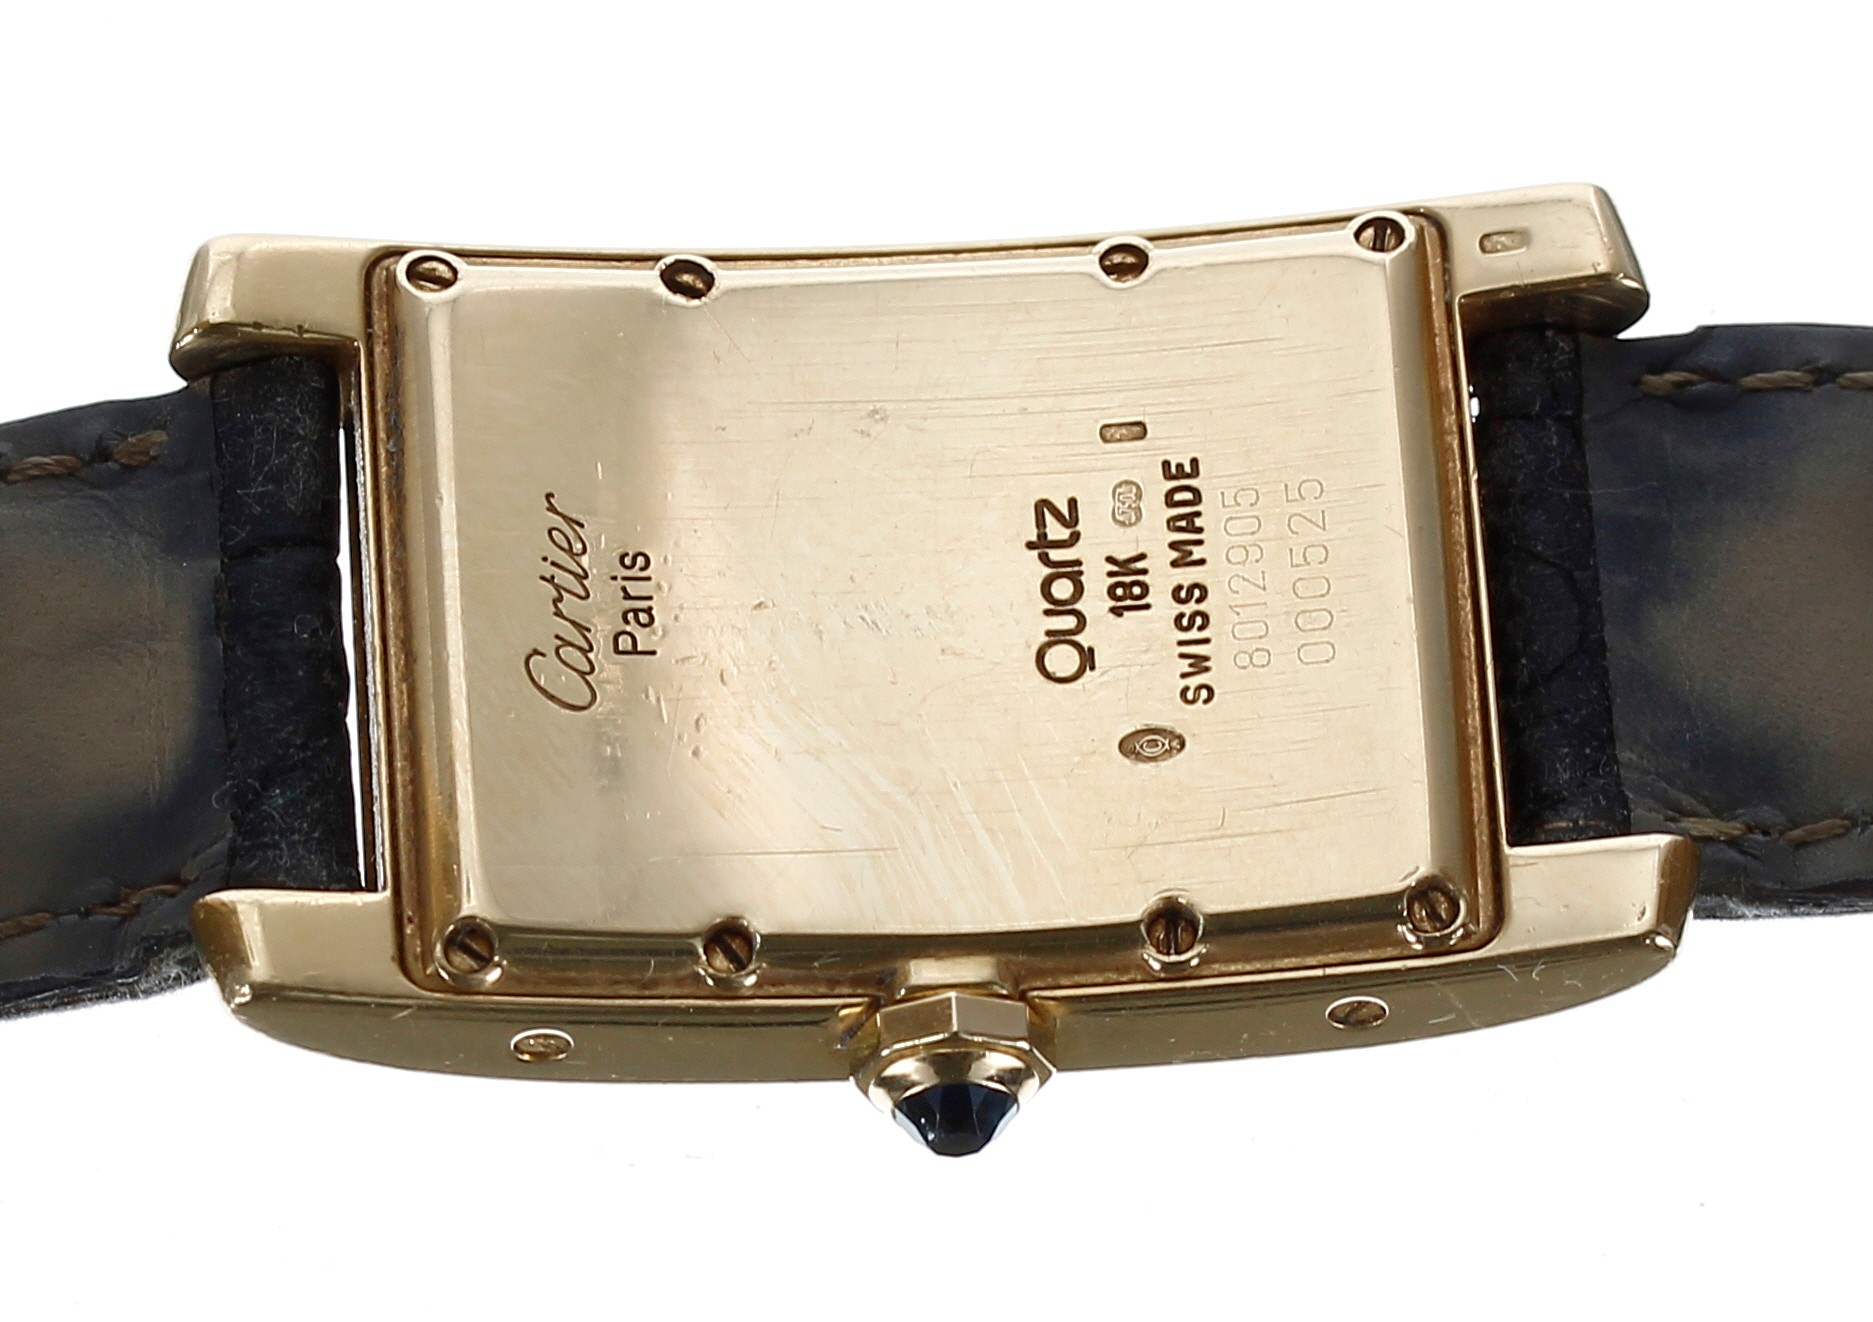 Cartier Tank Américane 18ct wristwatch, reference no. 8012905, serial no. 0005xx, silvered dial with - Image 2 of 2